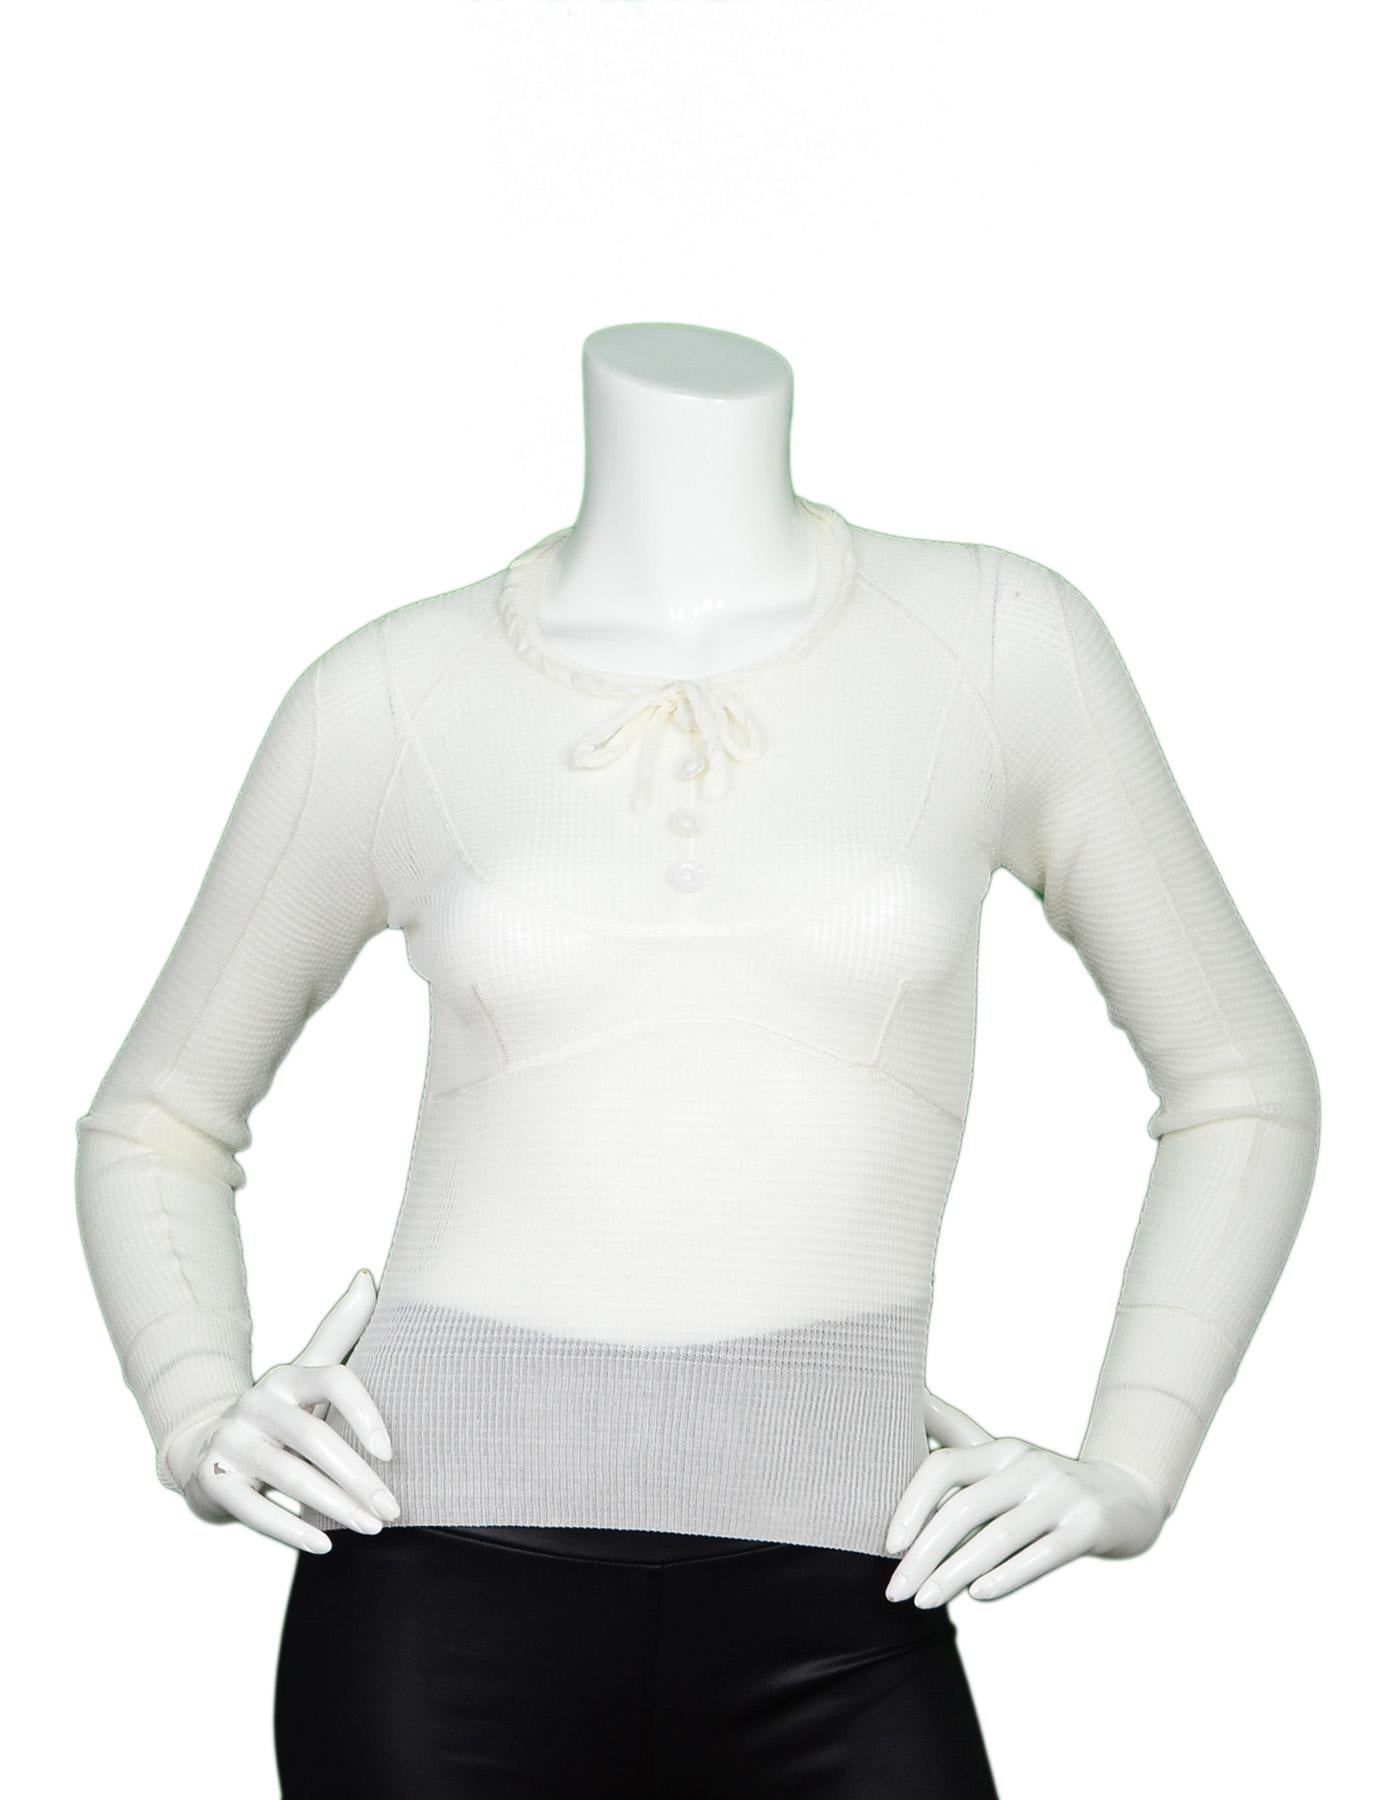 Louis Vuitton Cream Long-Sleeve Silk Waffle Sheer Knit Top W/ White Flower Buttons & Tie Neck Sz S

Made In: Italy
Color: Cream
Materials: Silk waffle knit (no composition tag)
Opening/Closure: Pull over
Overall Condition: Excellent pre-owned